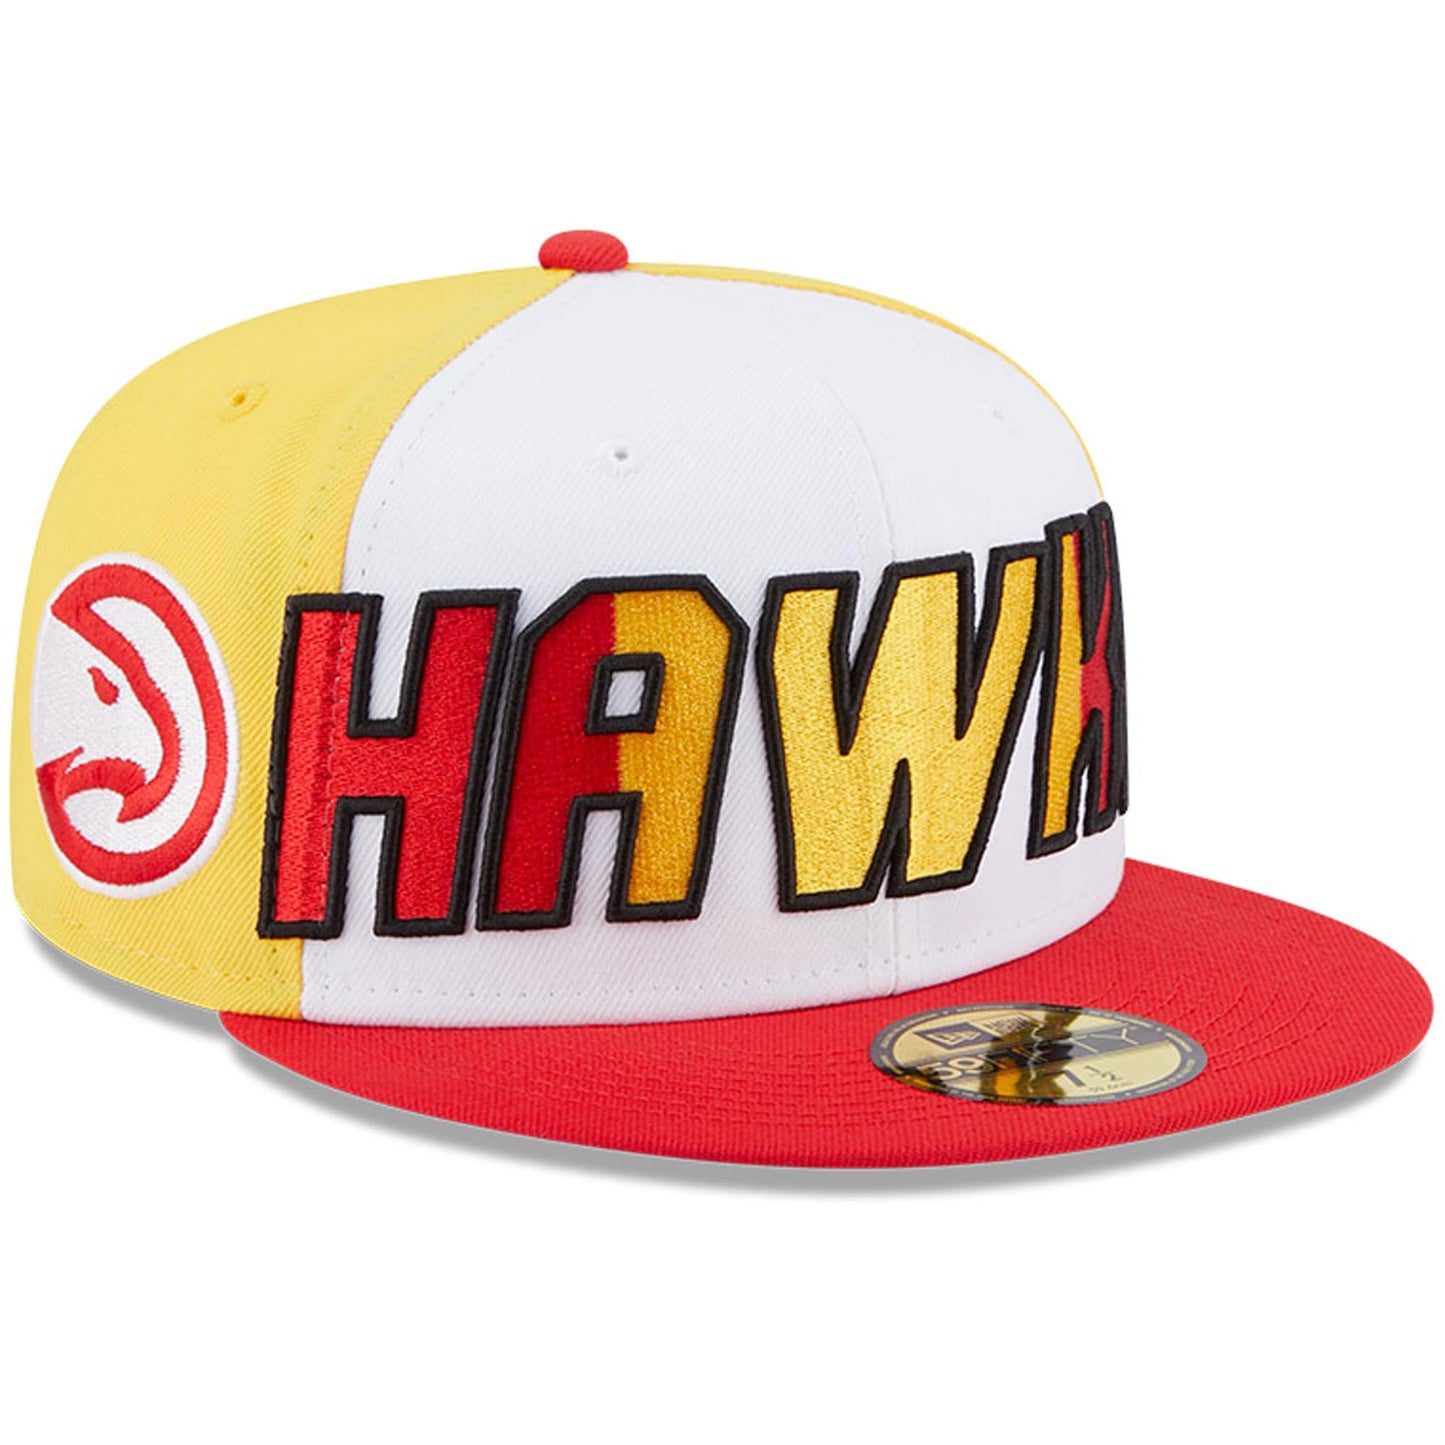 Atlanta Hawks New Era Back Half 9FIFTY Fitted Hat - White/Red